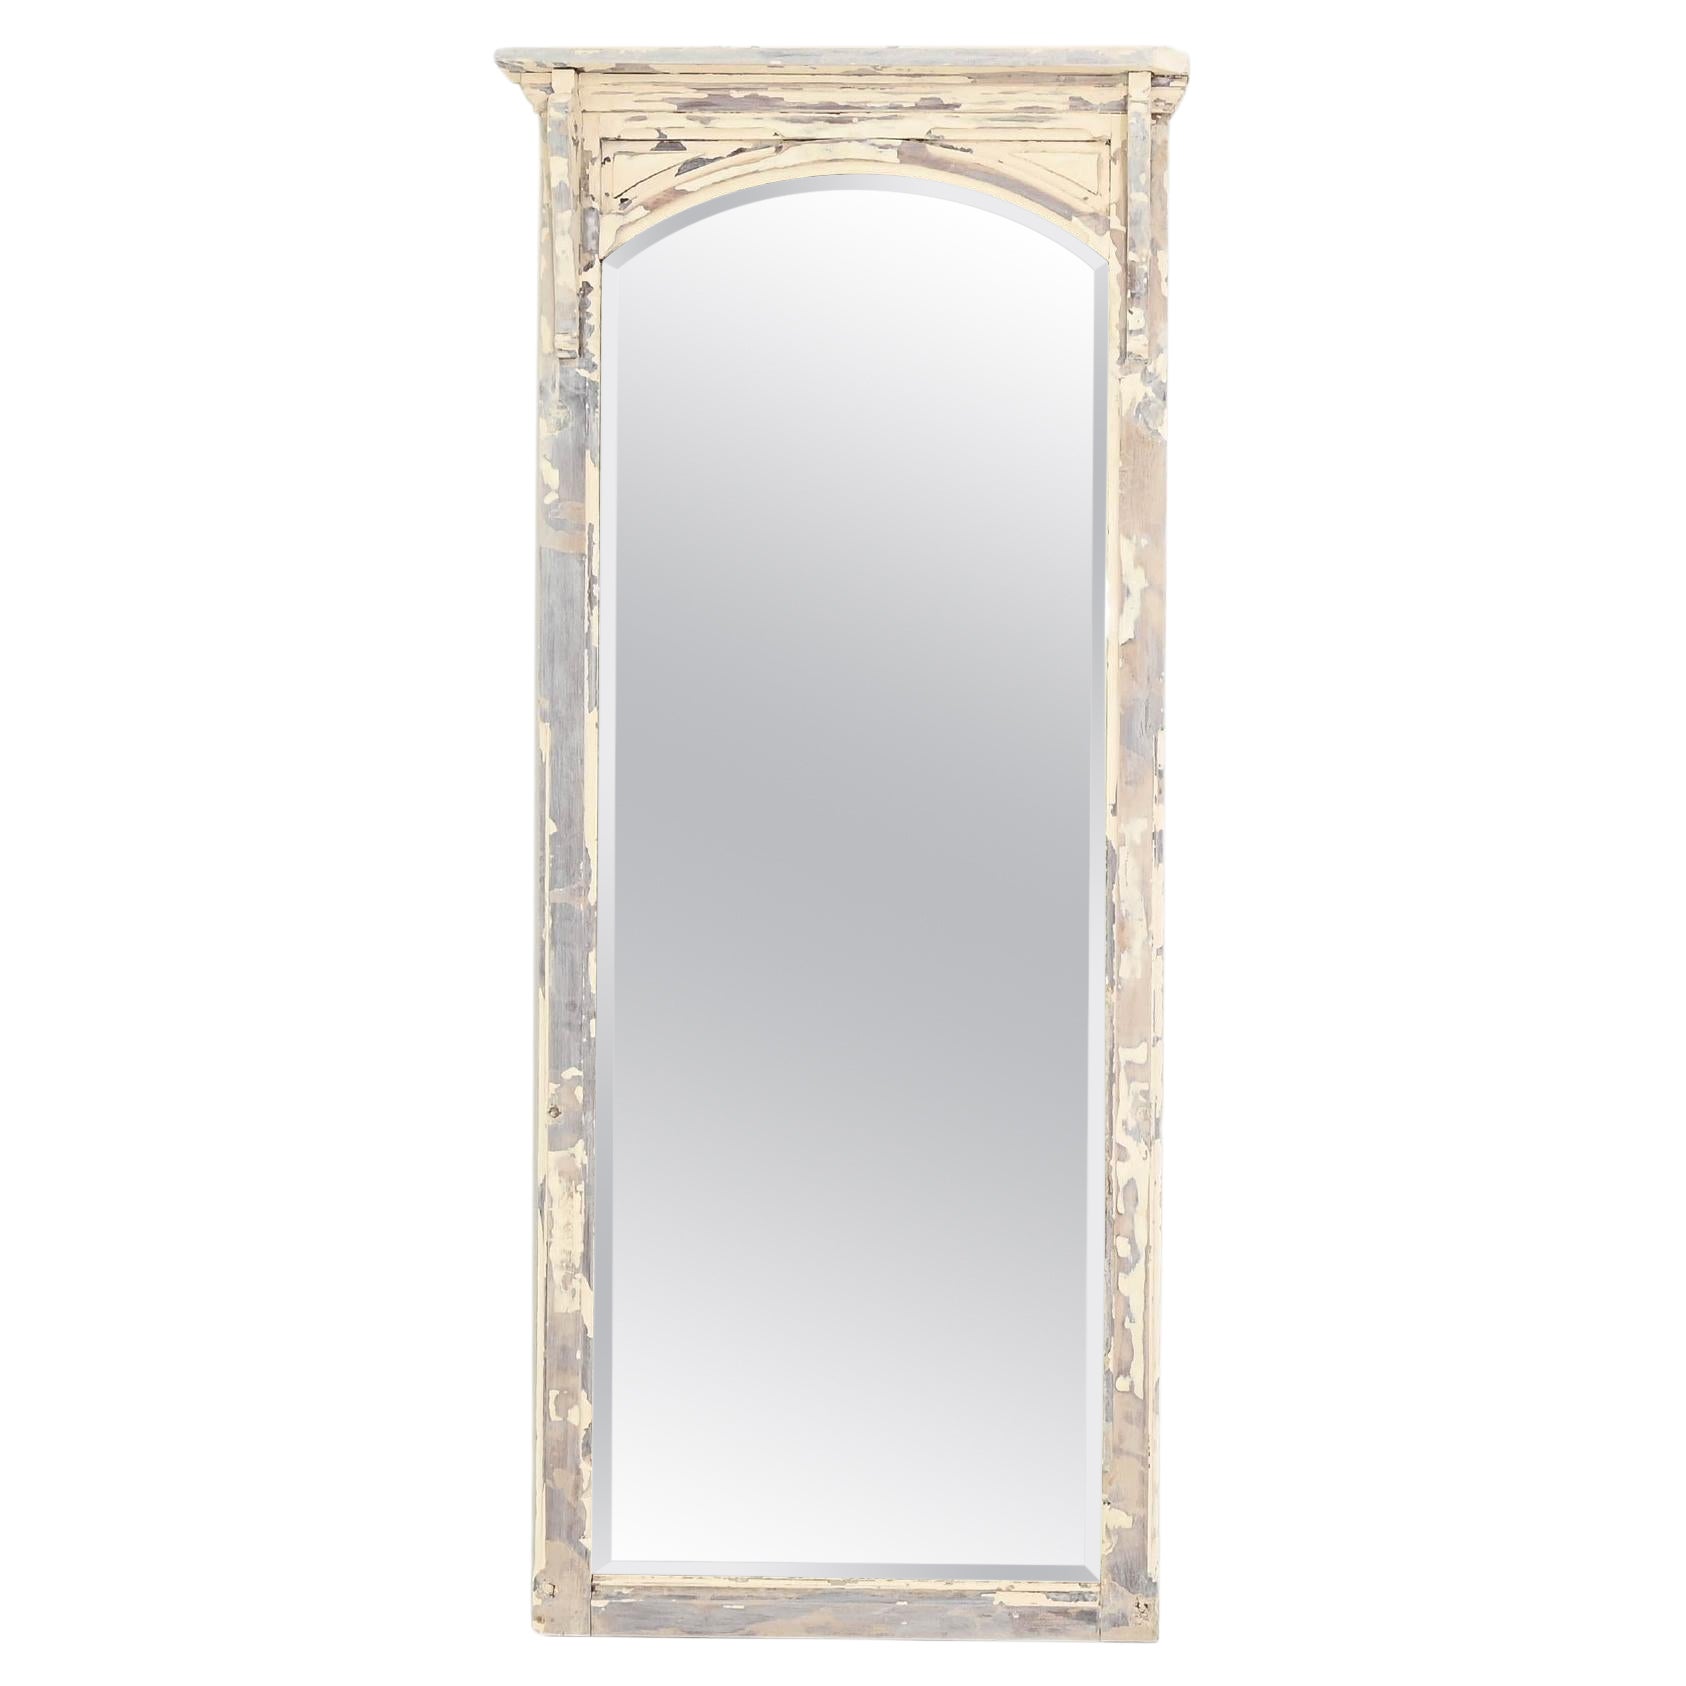 Early 20th Century French Wooden White Patinated Mirror For Sale